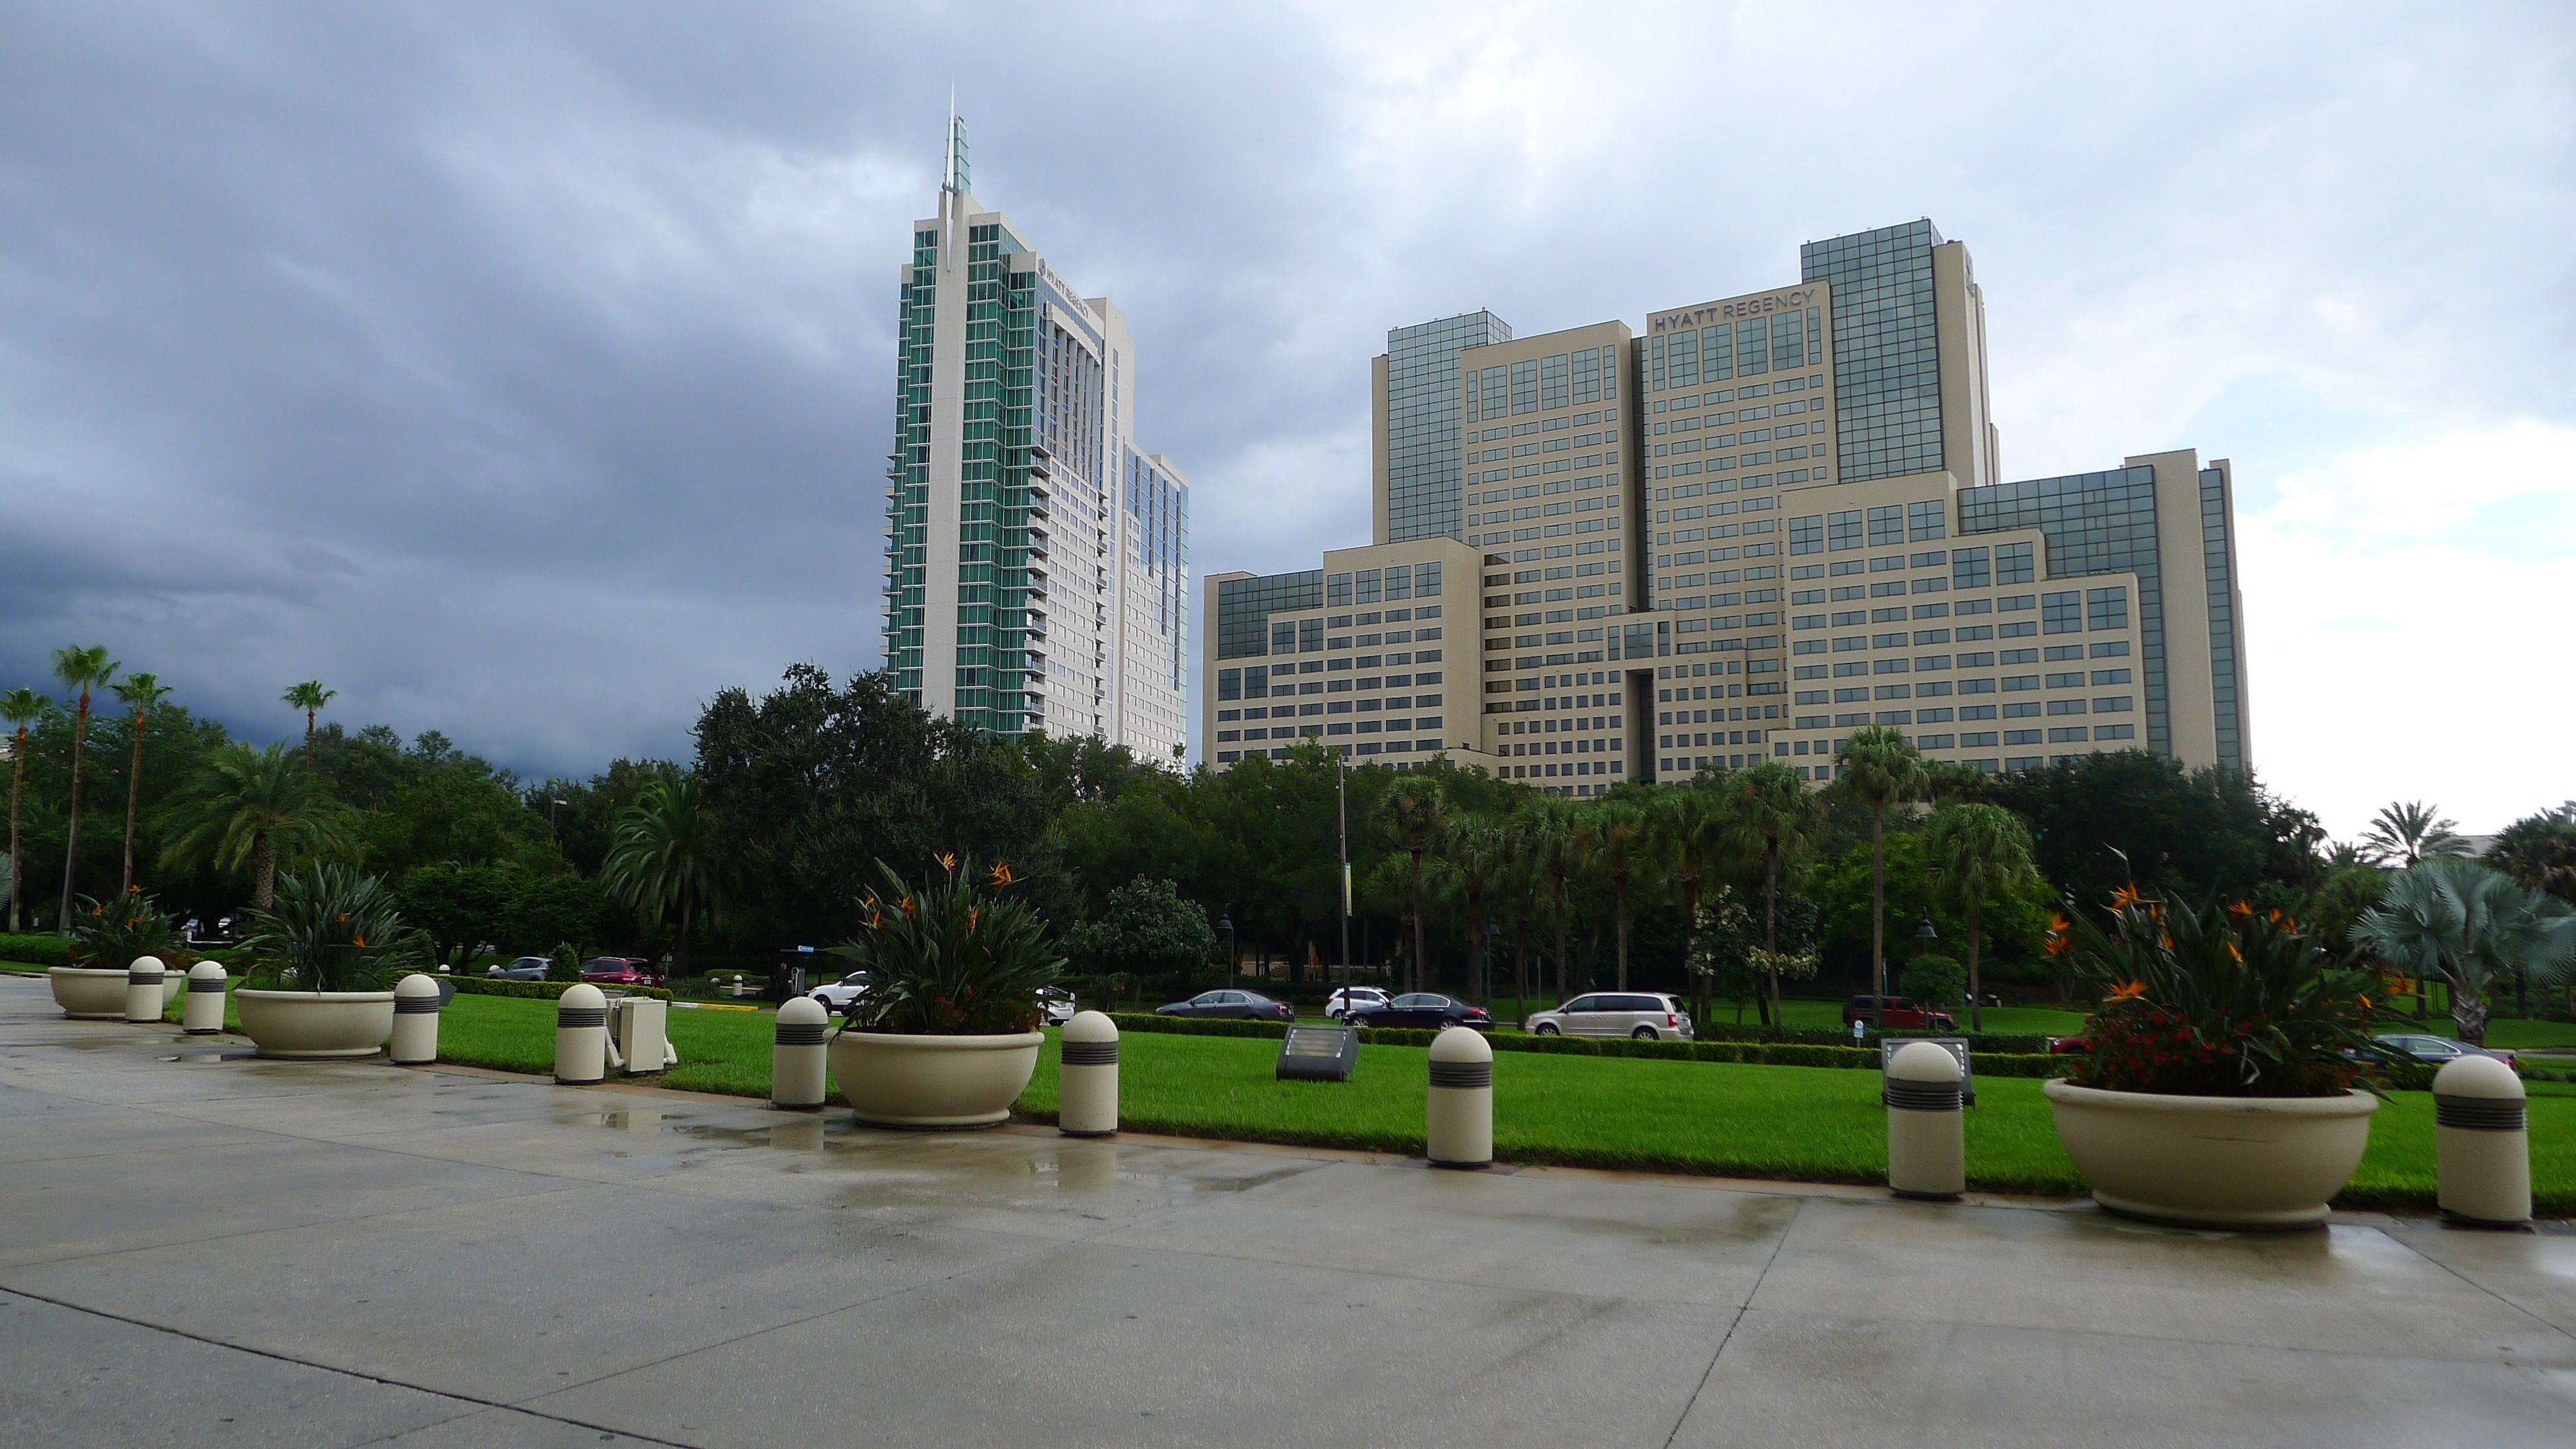 Large buildings on a rainy day in downtown Orlando, Florida.